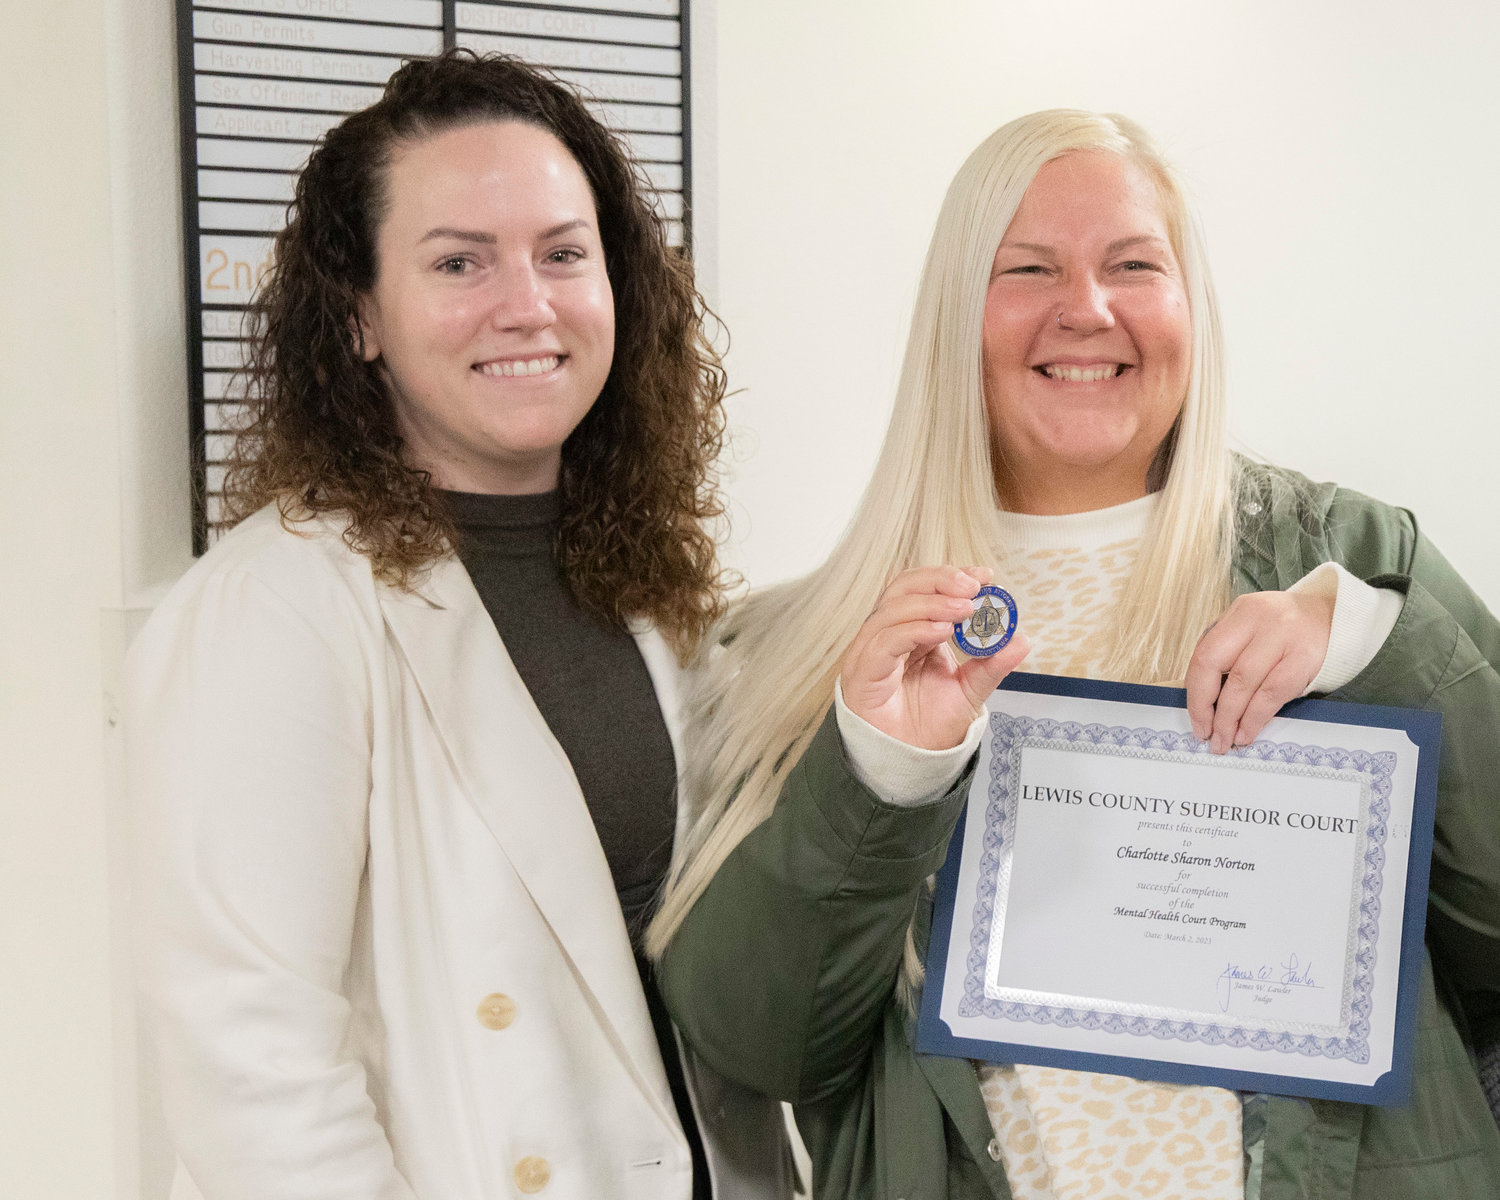 Coordinator Sophia Limacher smiles for a photo with Charlotte Sharon Norton on Thursday after a successful completion of the Mental Health Court Program.